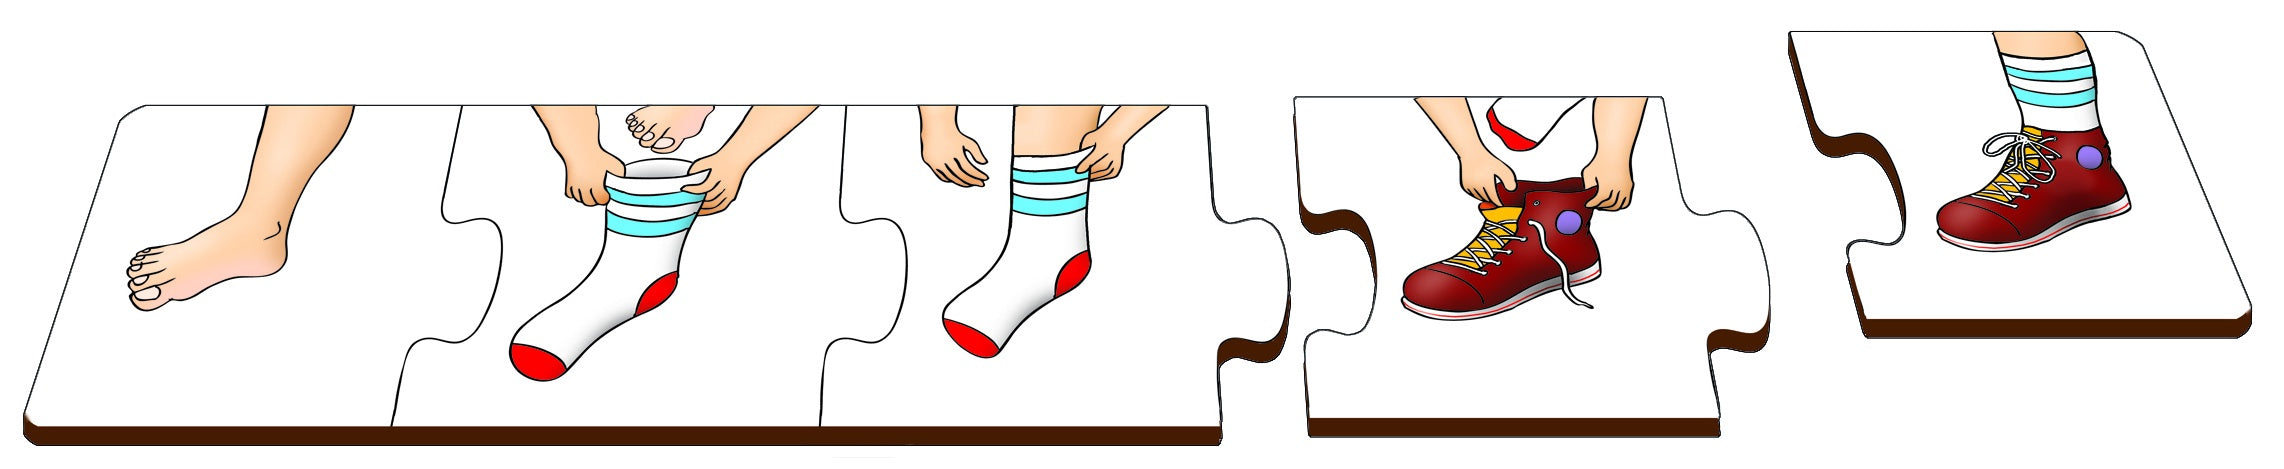 Tuzzles Sock and Shoes - Table Puzzle 10pcs